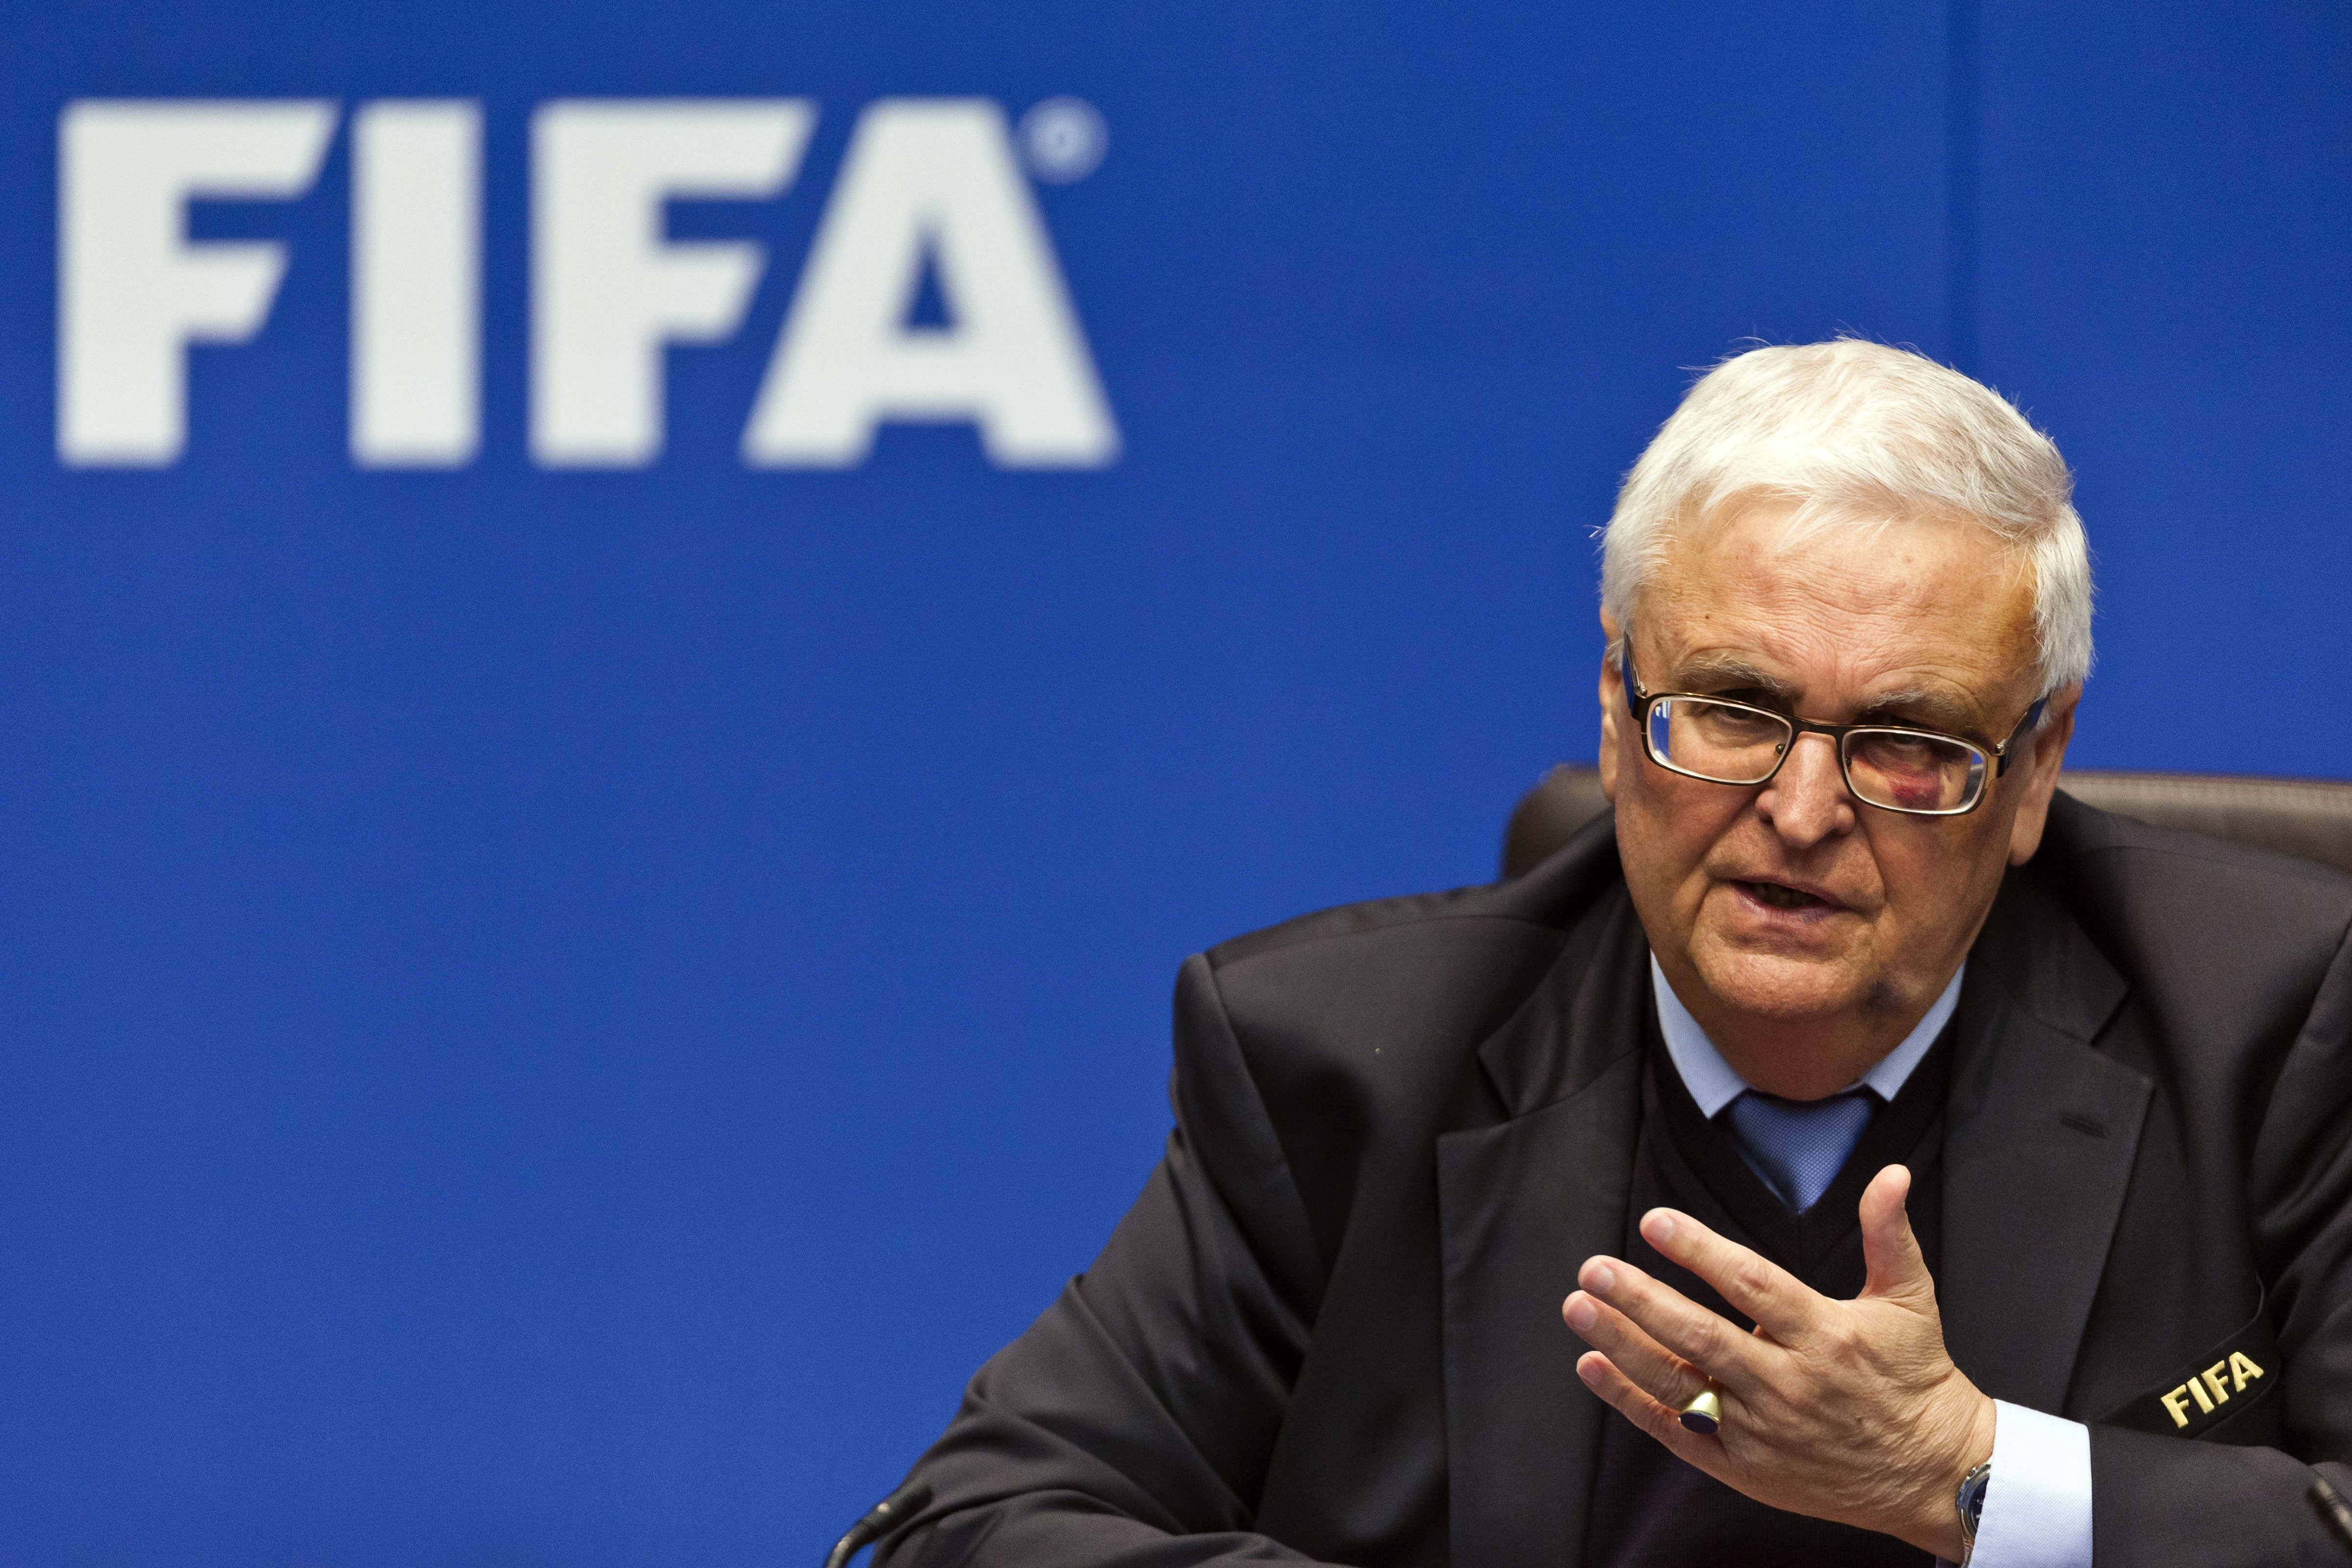 FIFA executive committee member Theo Zwanziger talks during a press conference following an executive meeting of the football's world governing body at the Home of FIFA on March 21, 2014 in Zurich. A report on migrant workers' rights in Qatar ahead of the 2022 World Cup and the 2014 FIFA World Cup in Brazil was on the agenda. AFP PHOTO / MICHAEL BUHOLZER        (Photo credit should read MICHAEL BUHOLZER/AFP/Getty Images) (AFP&mdash;AFP/Getty Images)